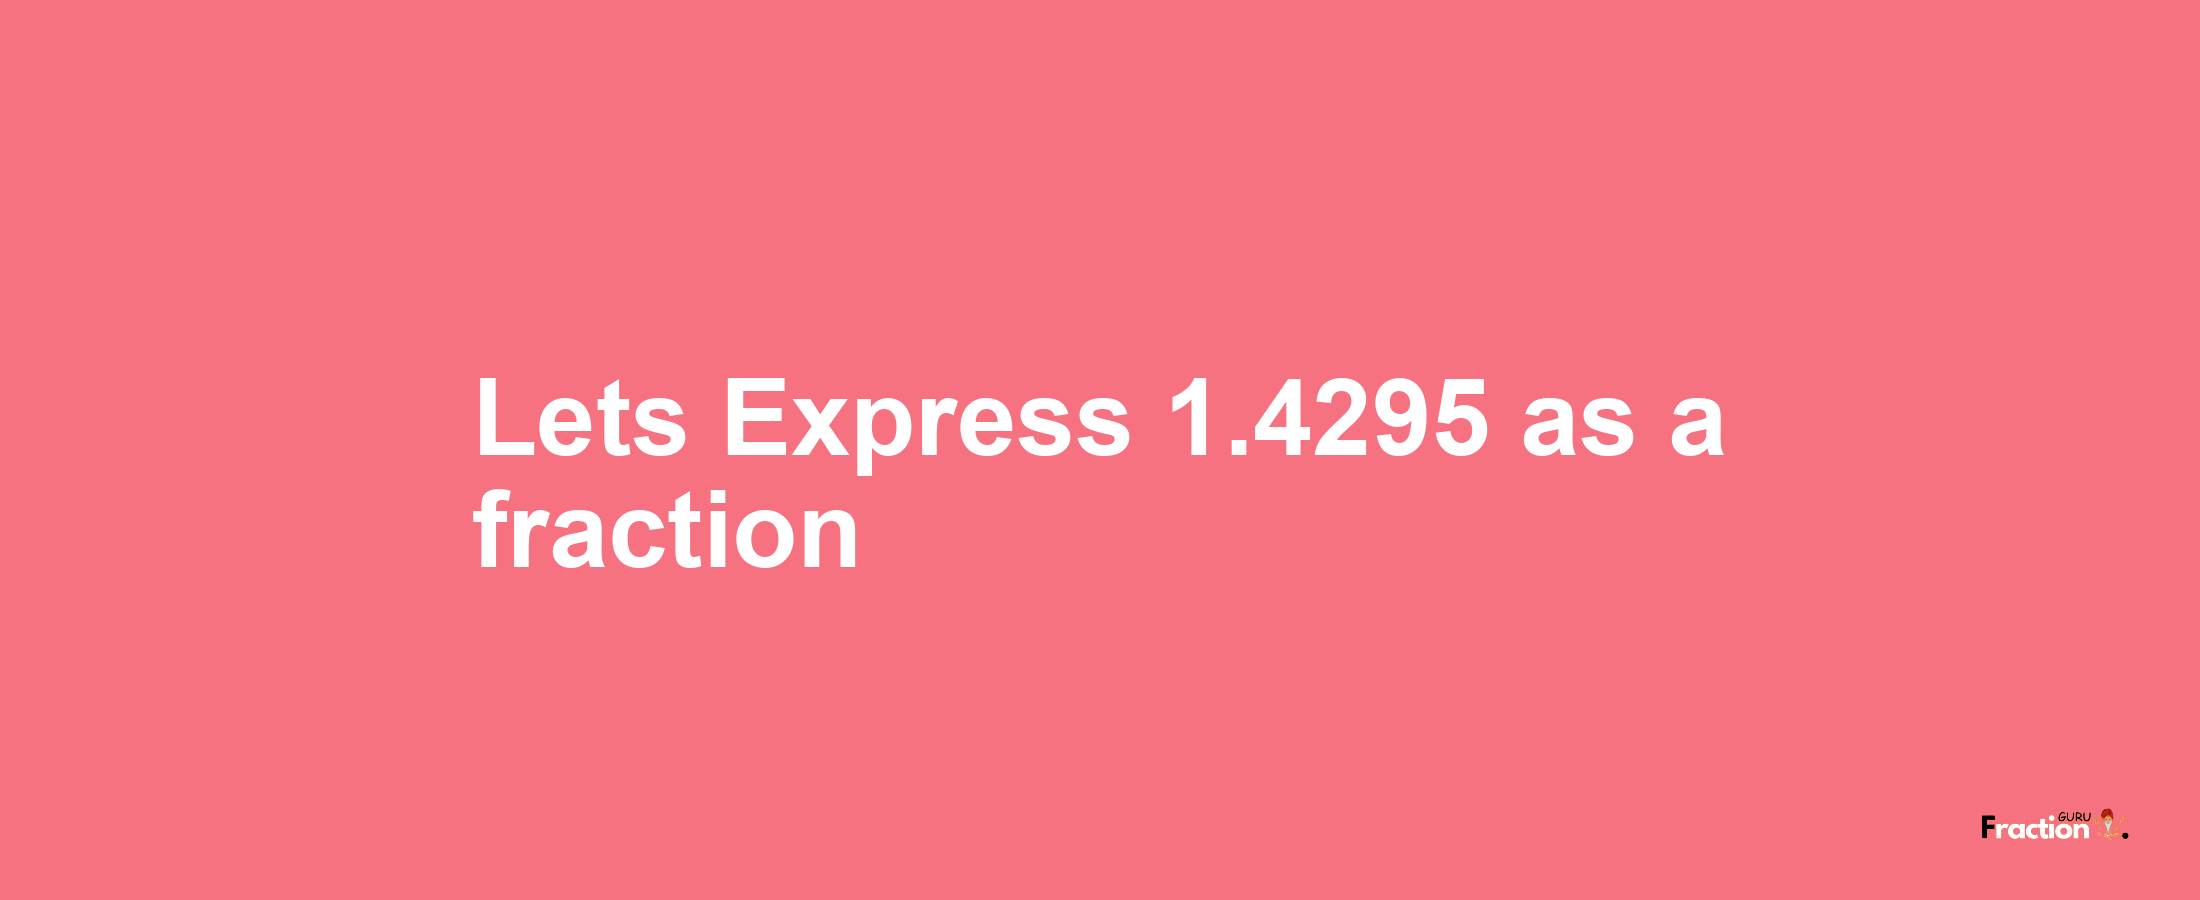 Lets Express 1.4295 as afraction